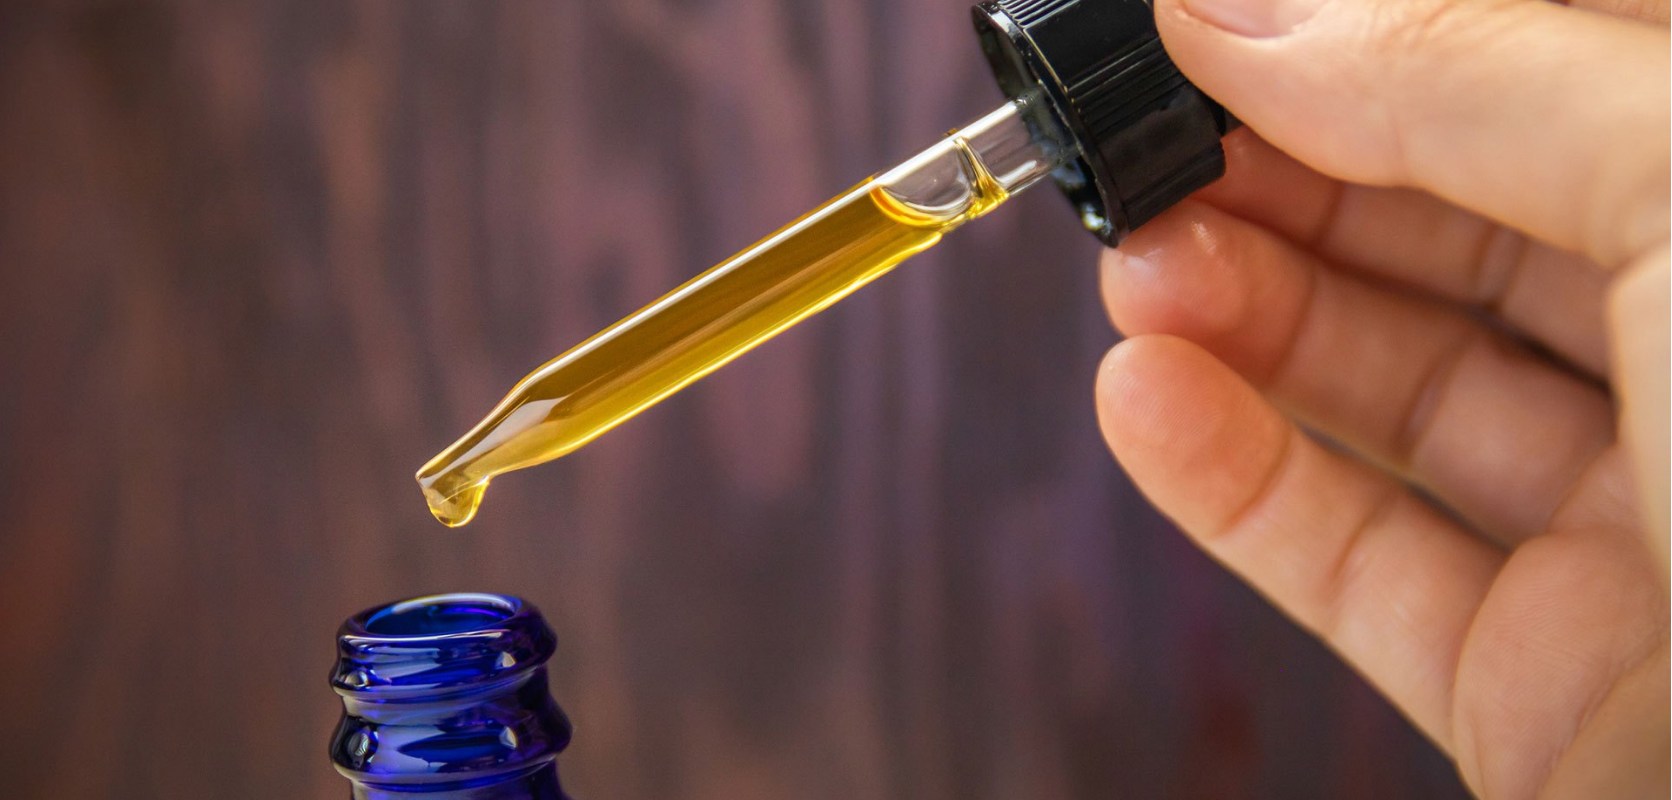 The best THC tincture in Canada can be ingested orally by simply dropping a few drops under your tongue.